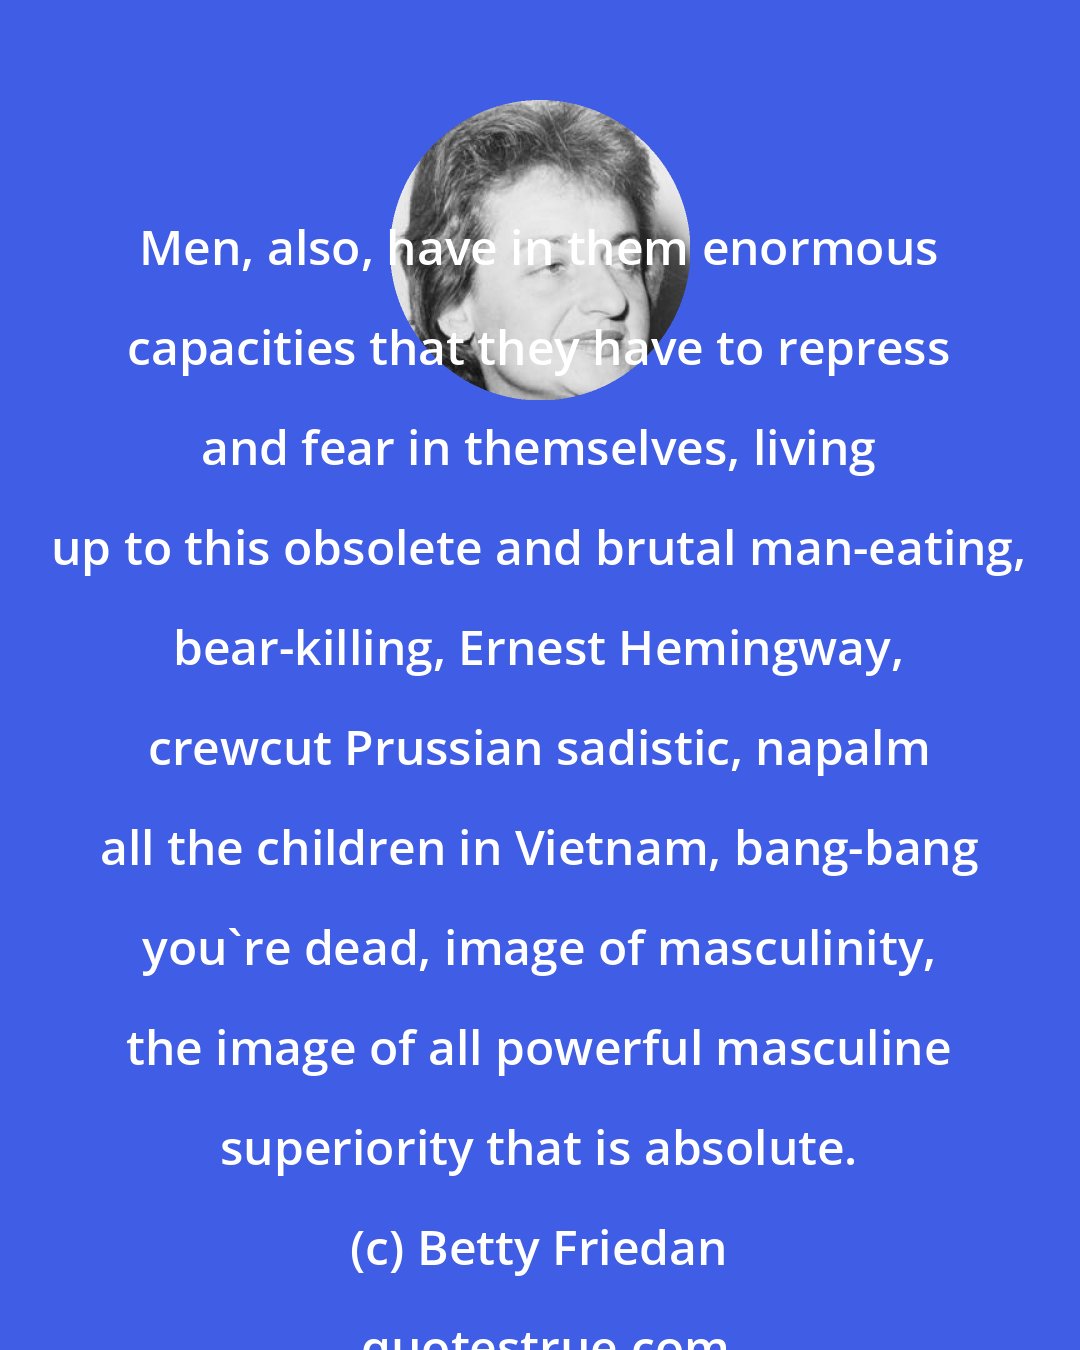 Betty Friedan: Men, also, have in them enormous capacities that they have to repress and fear in themselves, living up to this obsolete and brutal man-eating, bear-killing, Ernest Hemingway, crewcut Prussian sadistic, napalm all the children in Vietnam, bang-bang you're dead, image of masculinity, the image of all powerful masculine superiority that is absolute.